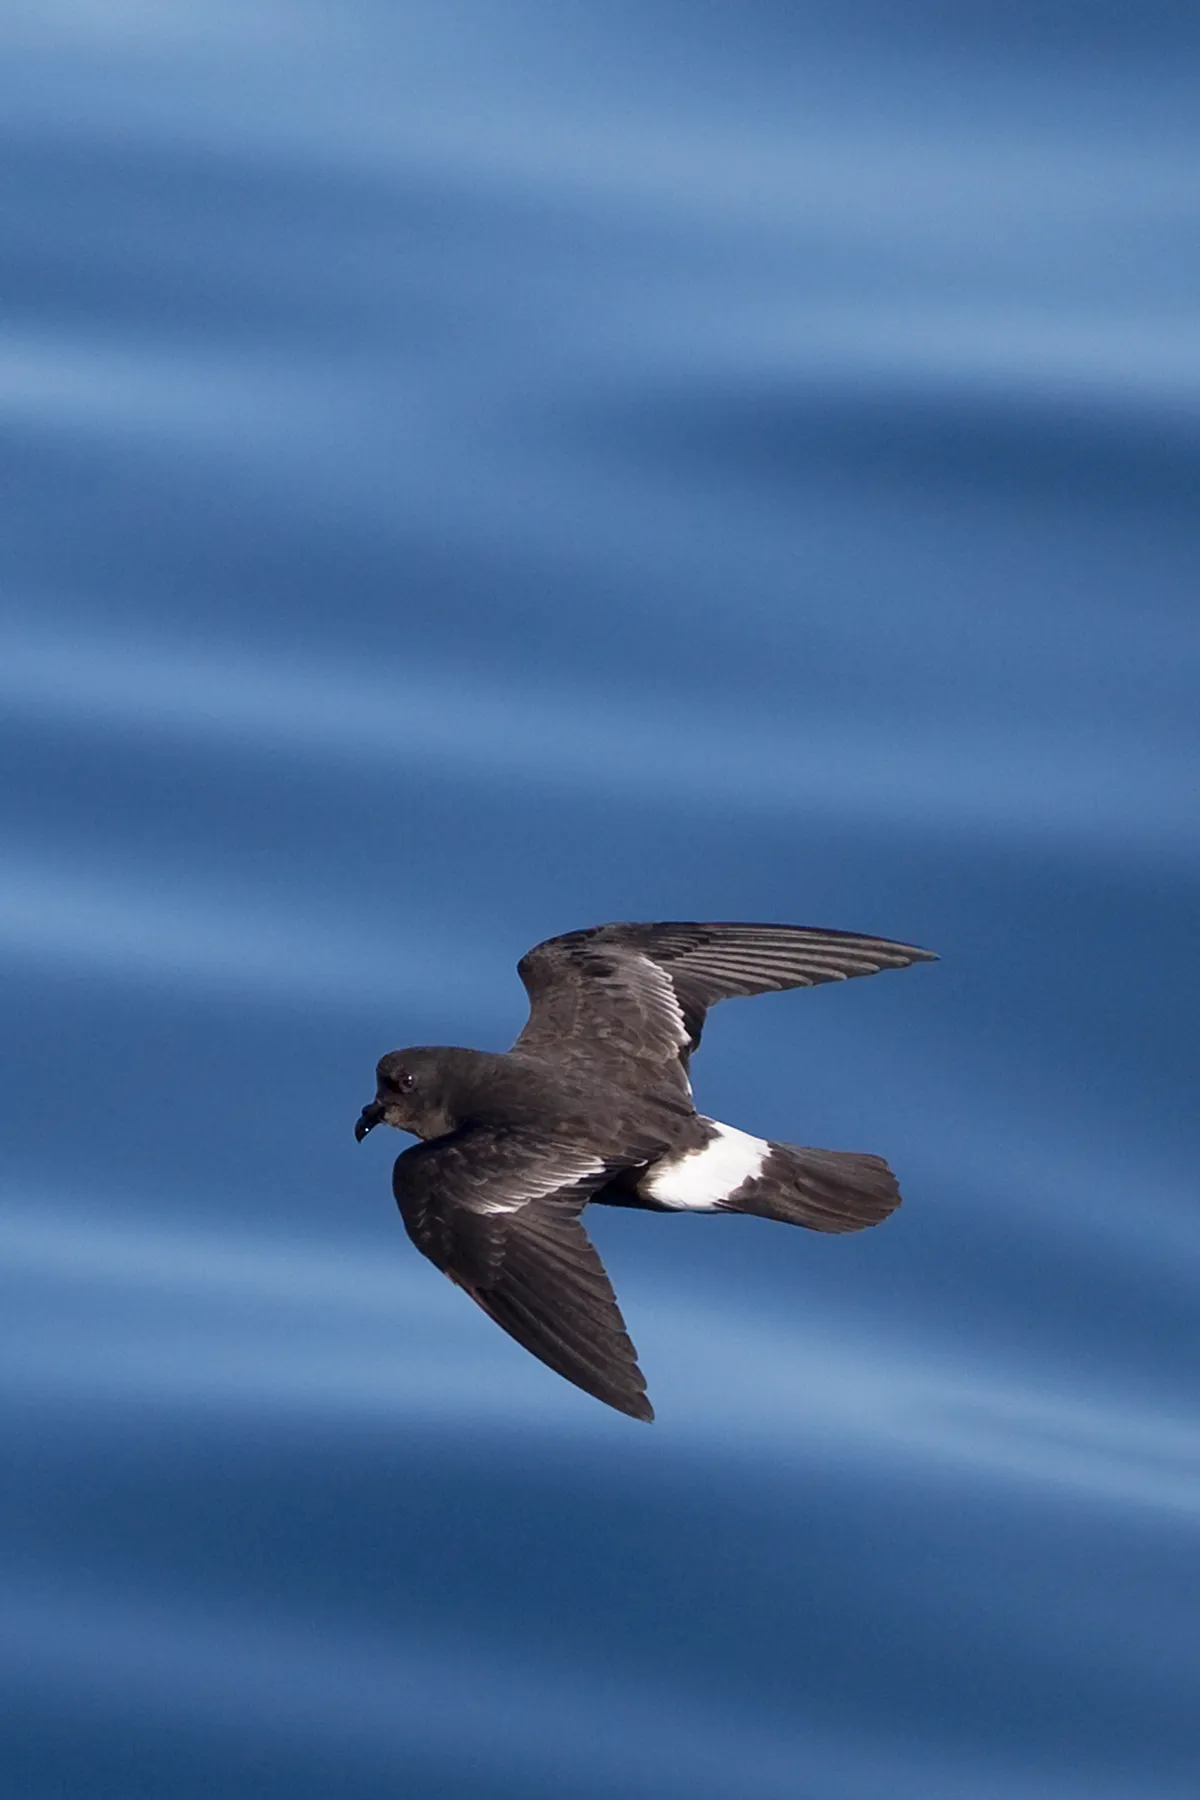 A small black and white bird flying over blue ocean water.